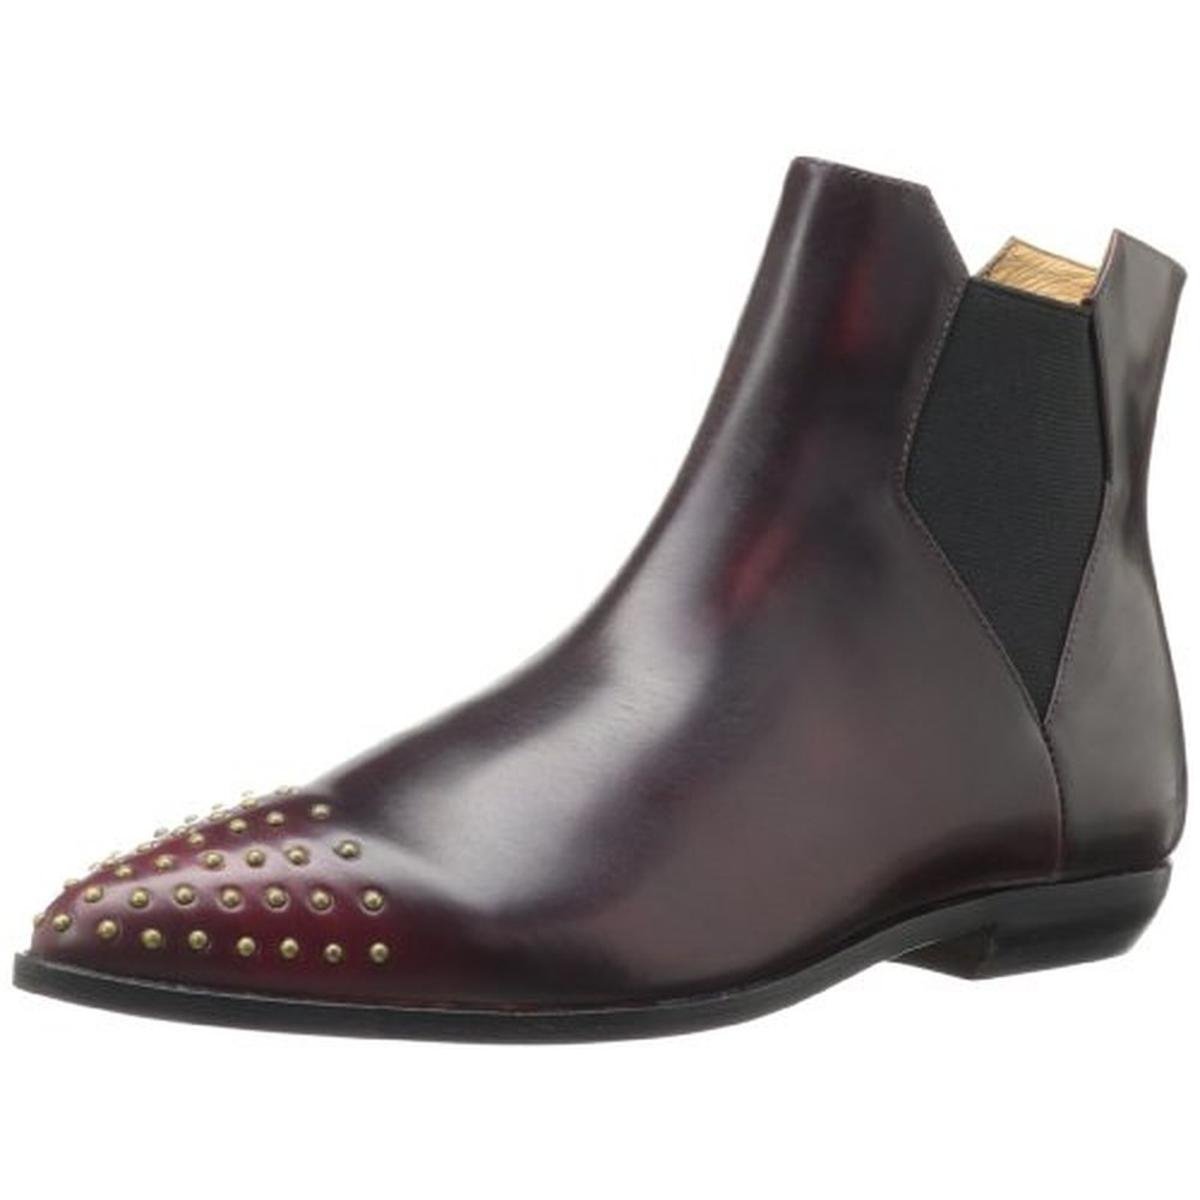 FIEL 6239 Womens Red Leather Pointed Toe Studded Ankle Boots Shoes 7 BHFO